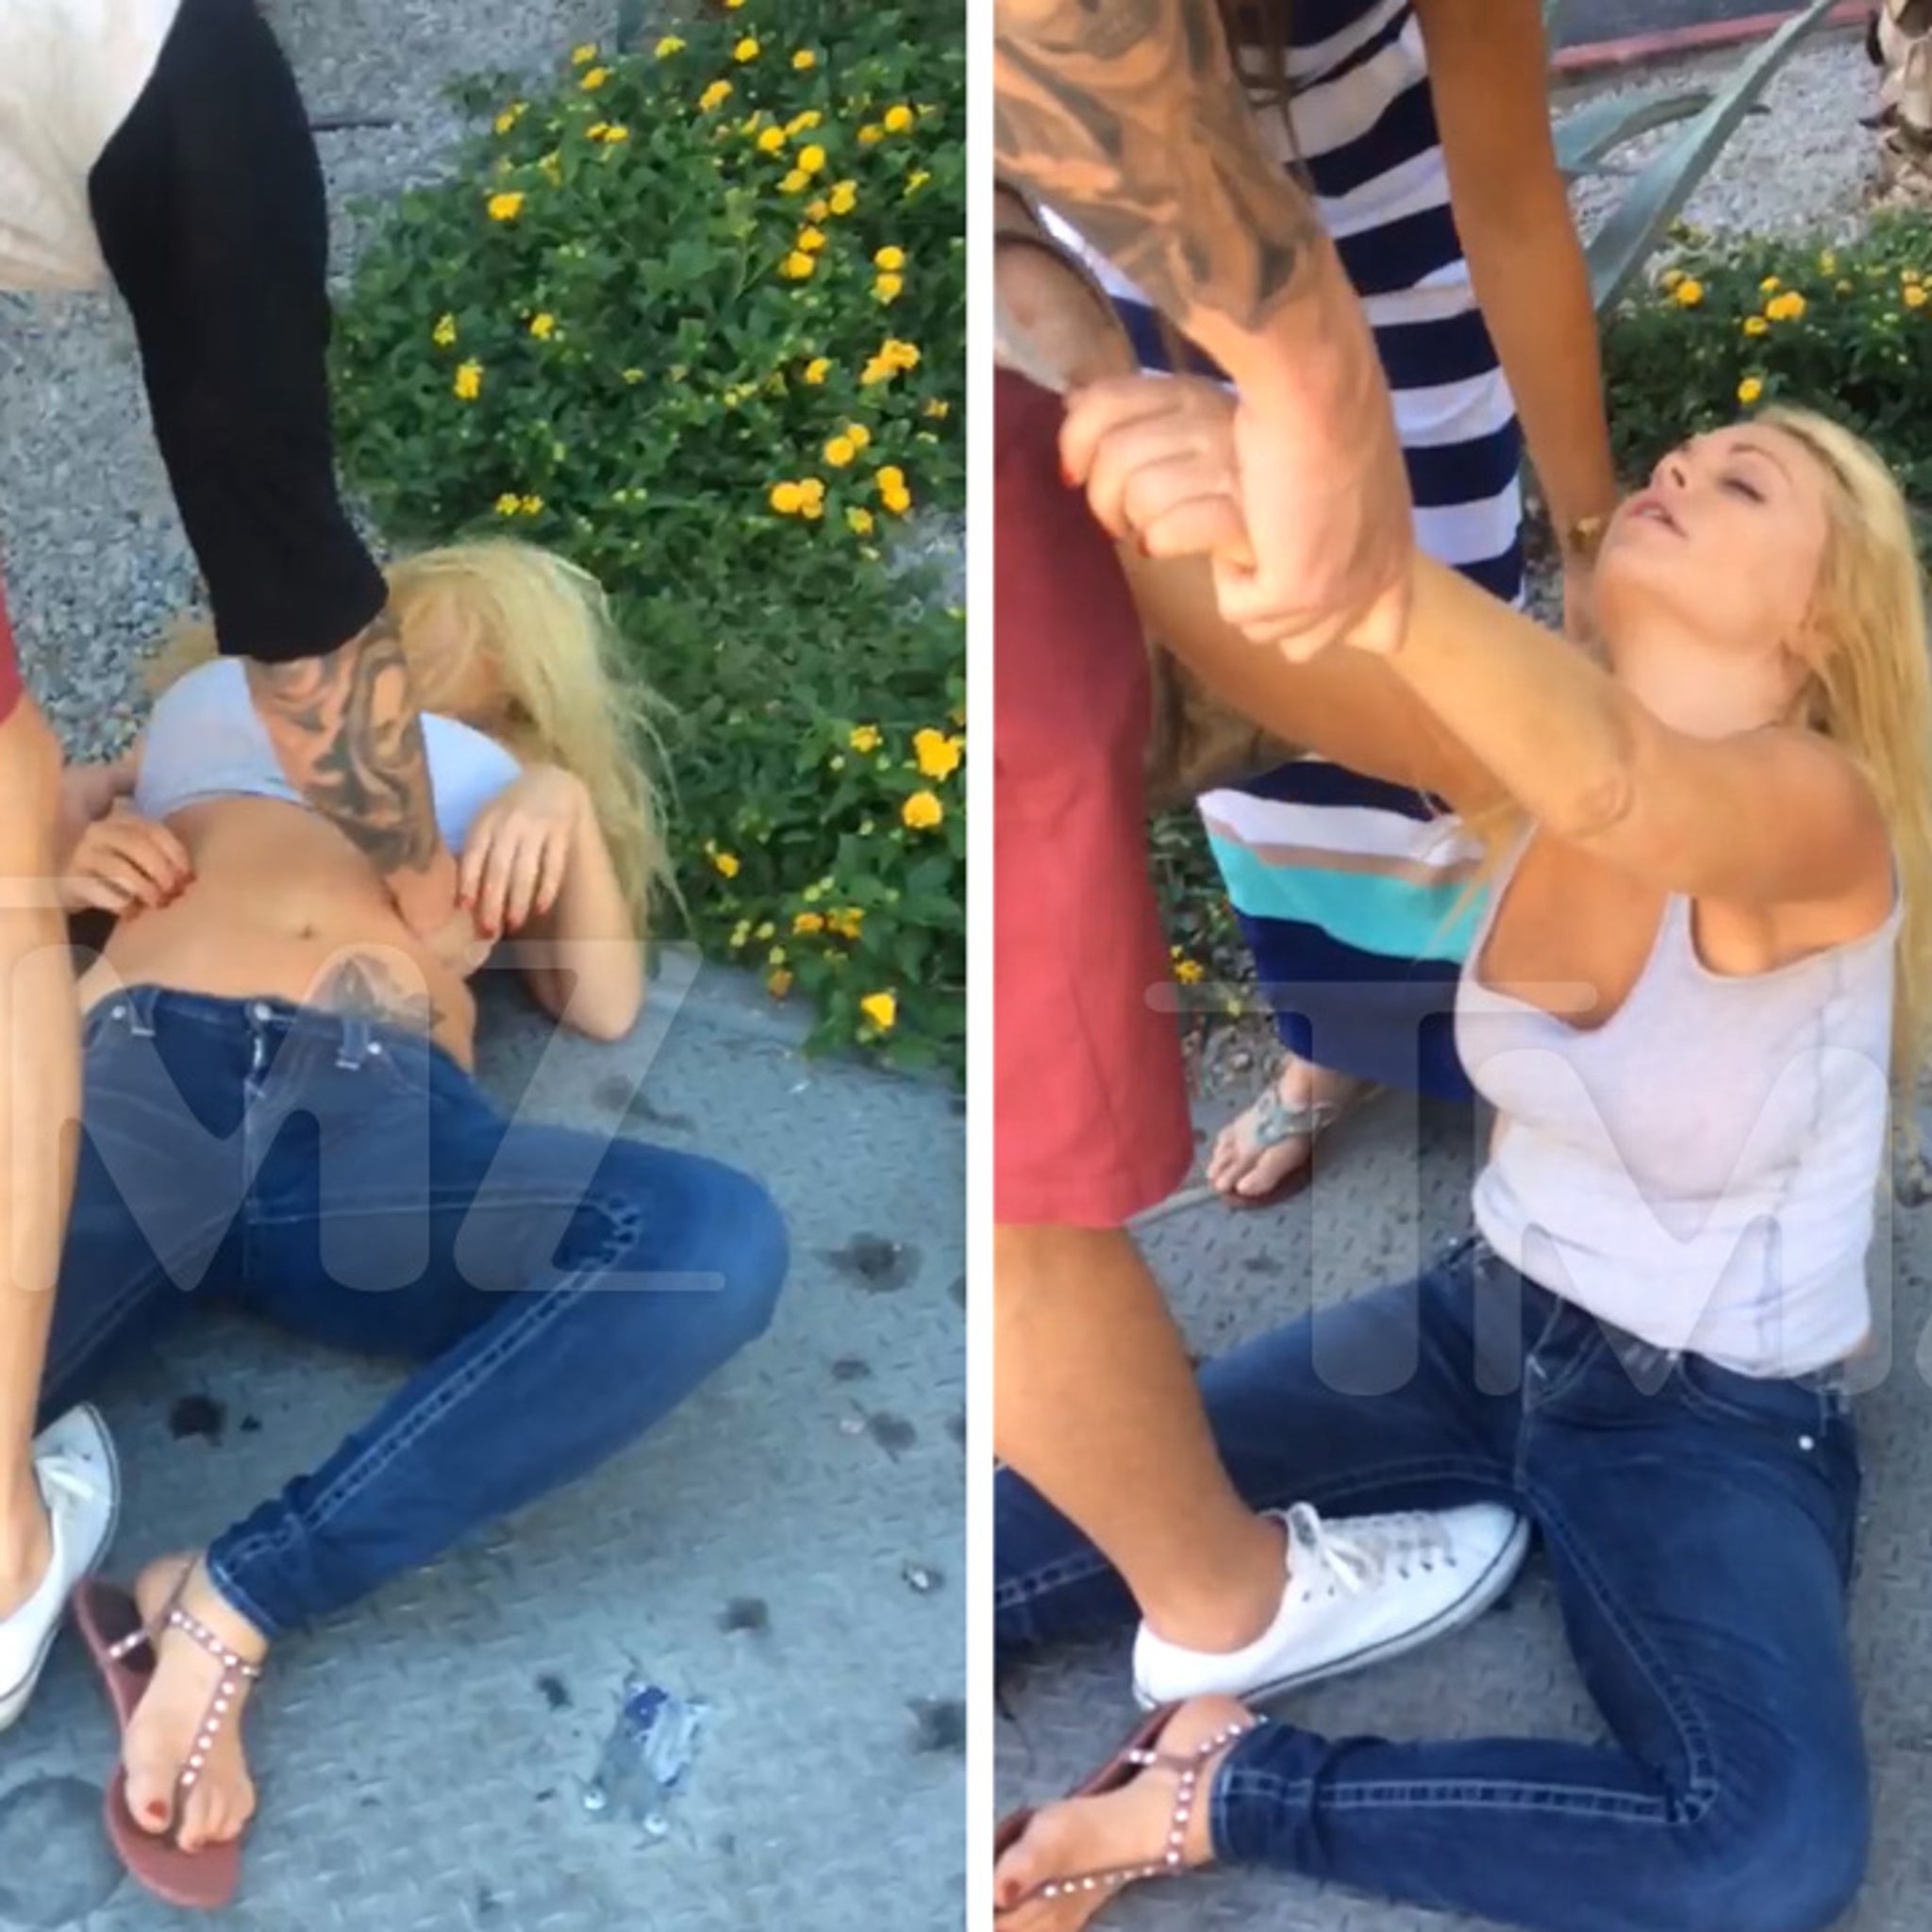 Vegas Passed Out Porn - Porn Star Jesse Jane -- Passed OUT COLD On the Vegas Strip! (VIDEO)